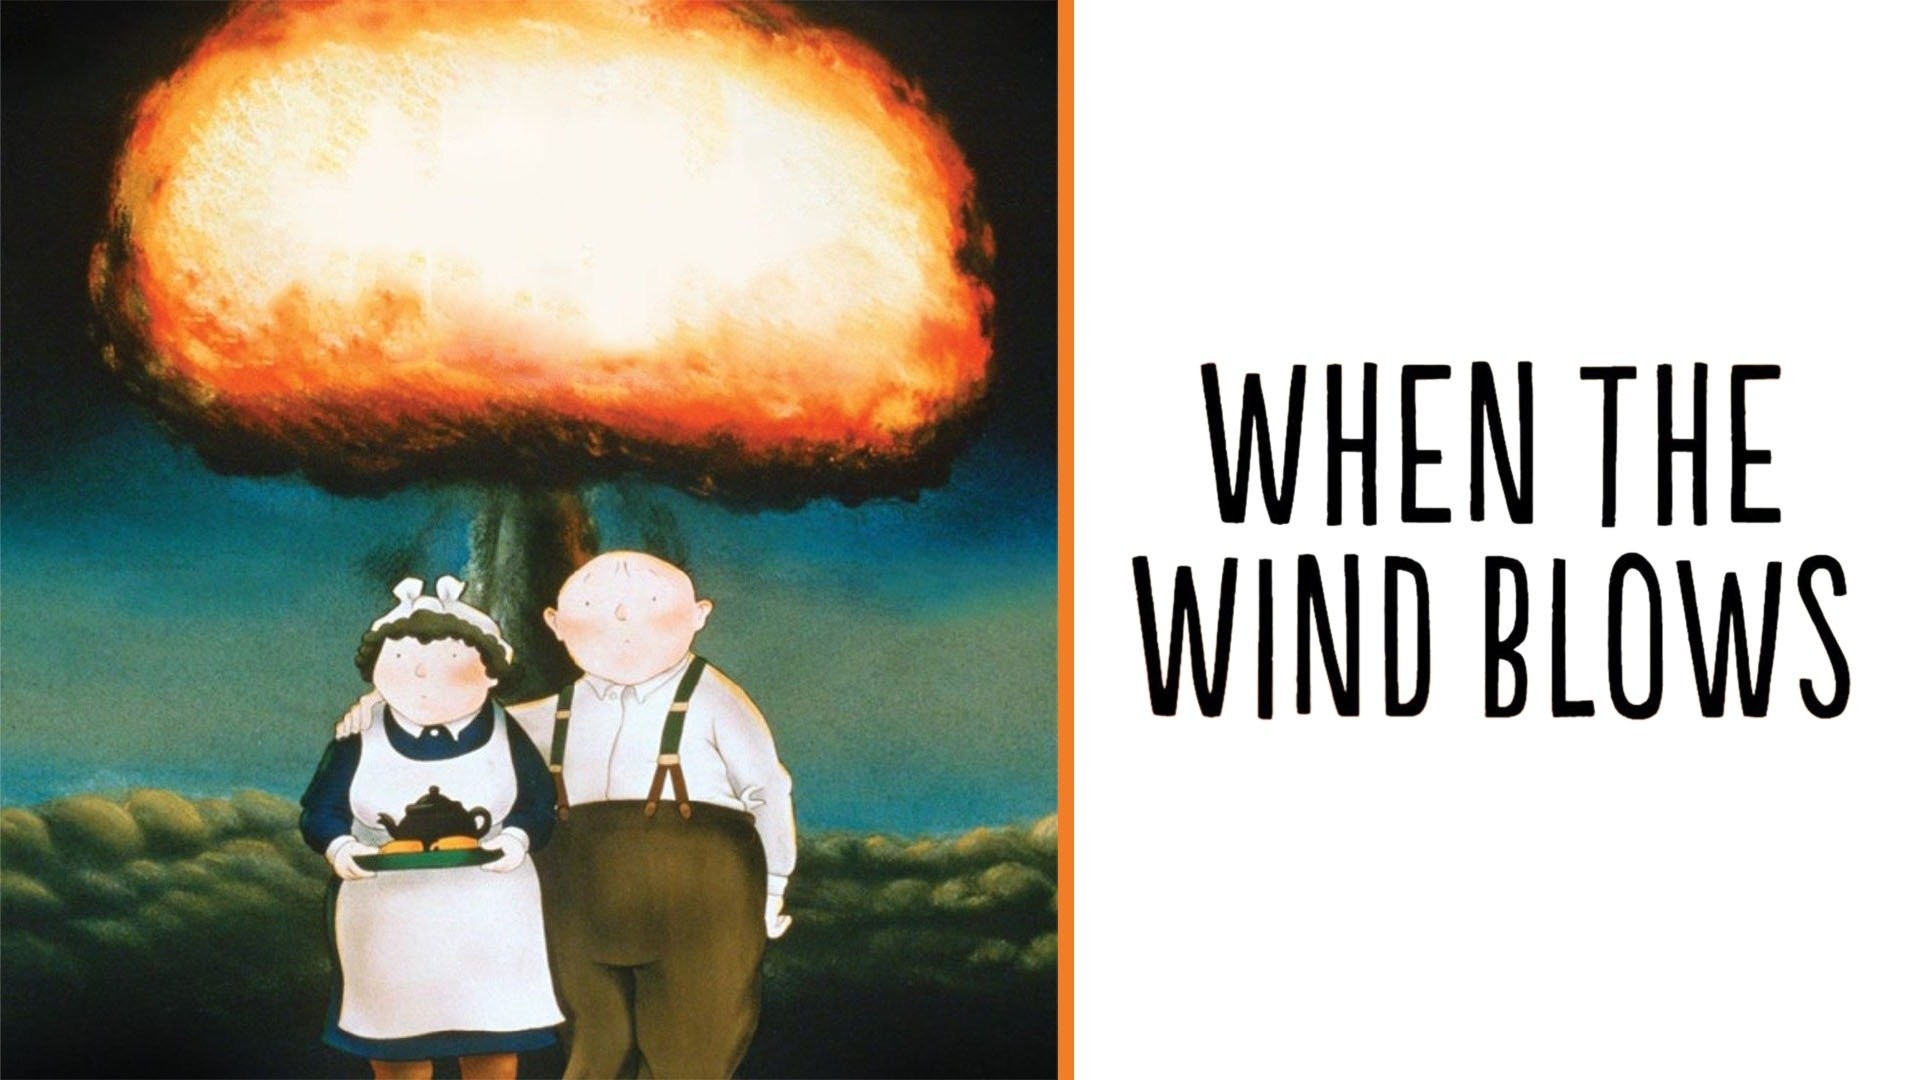 39 Facts about the movie When the Wind Blows - Facts.net